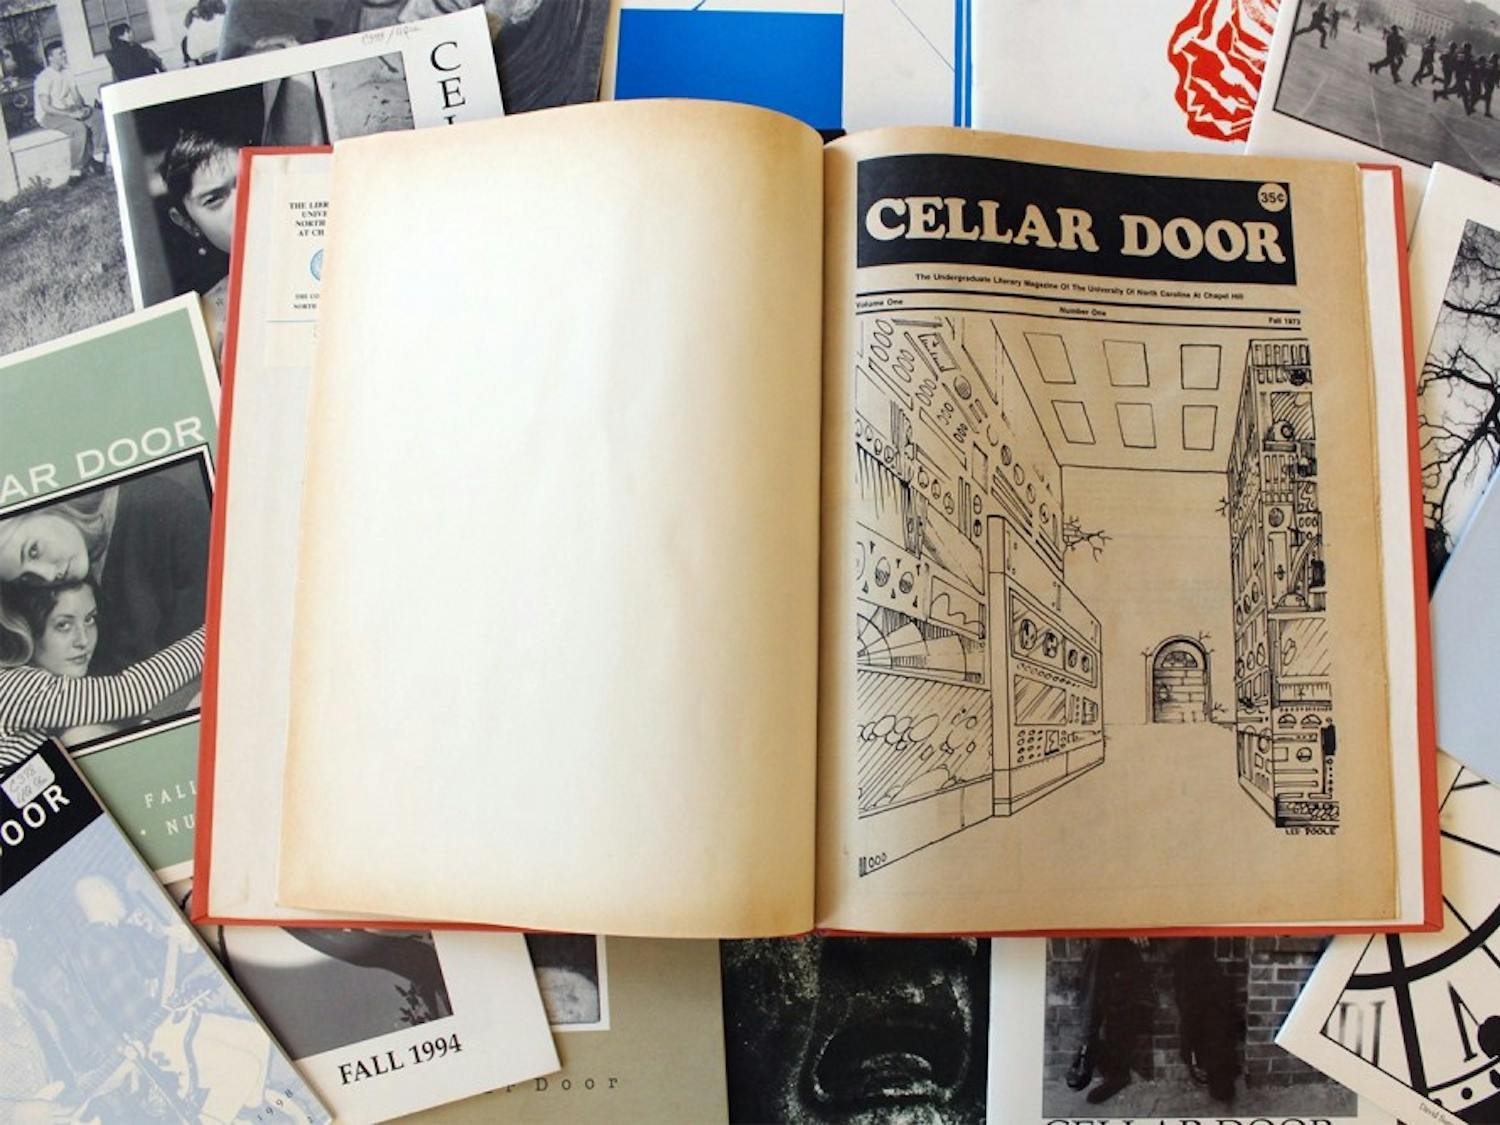 Cellar Door has been publishing student writers’, poets’, and artists’ work since 1973. Each semester they publish a 45-to-50 page issue with a launch party.&nbsp;